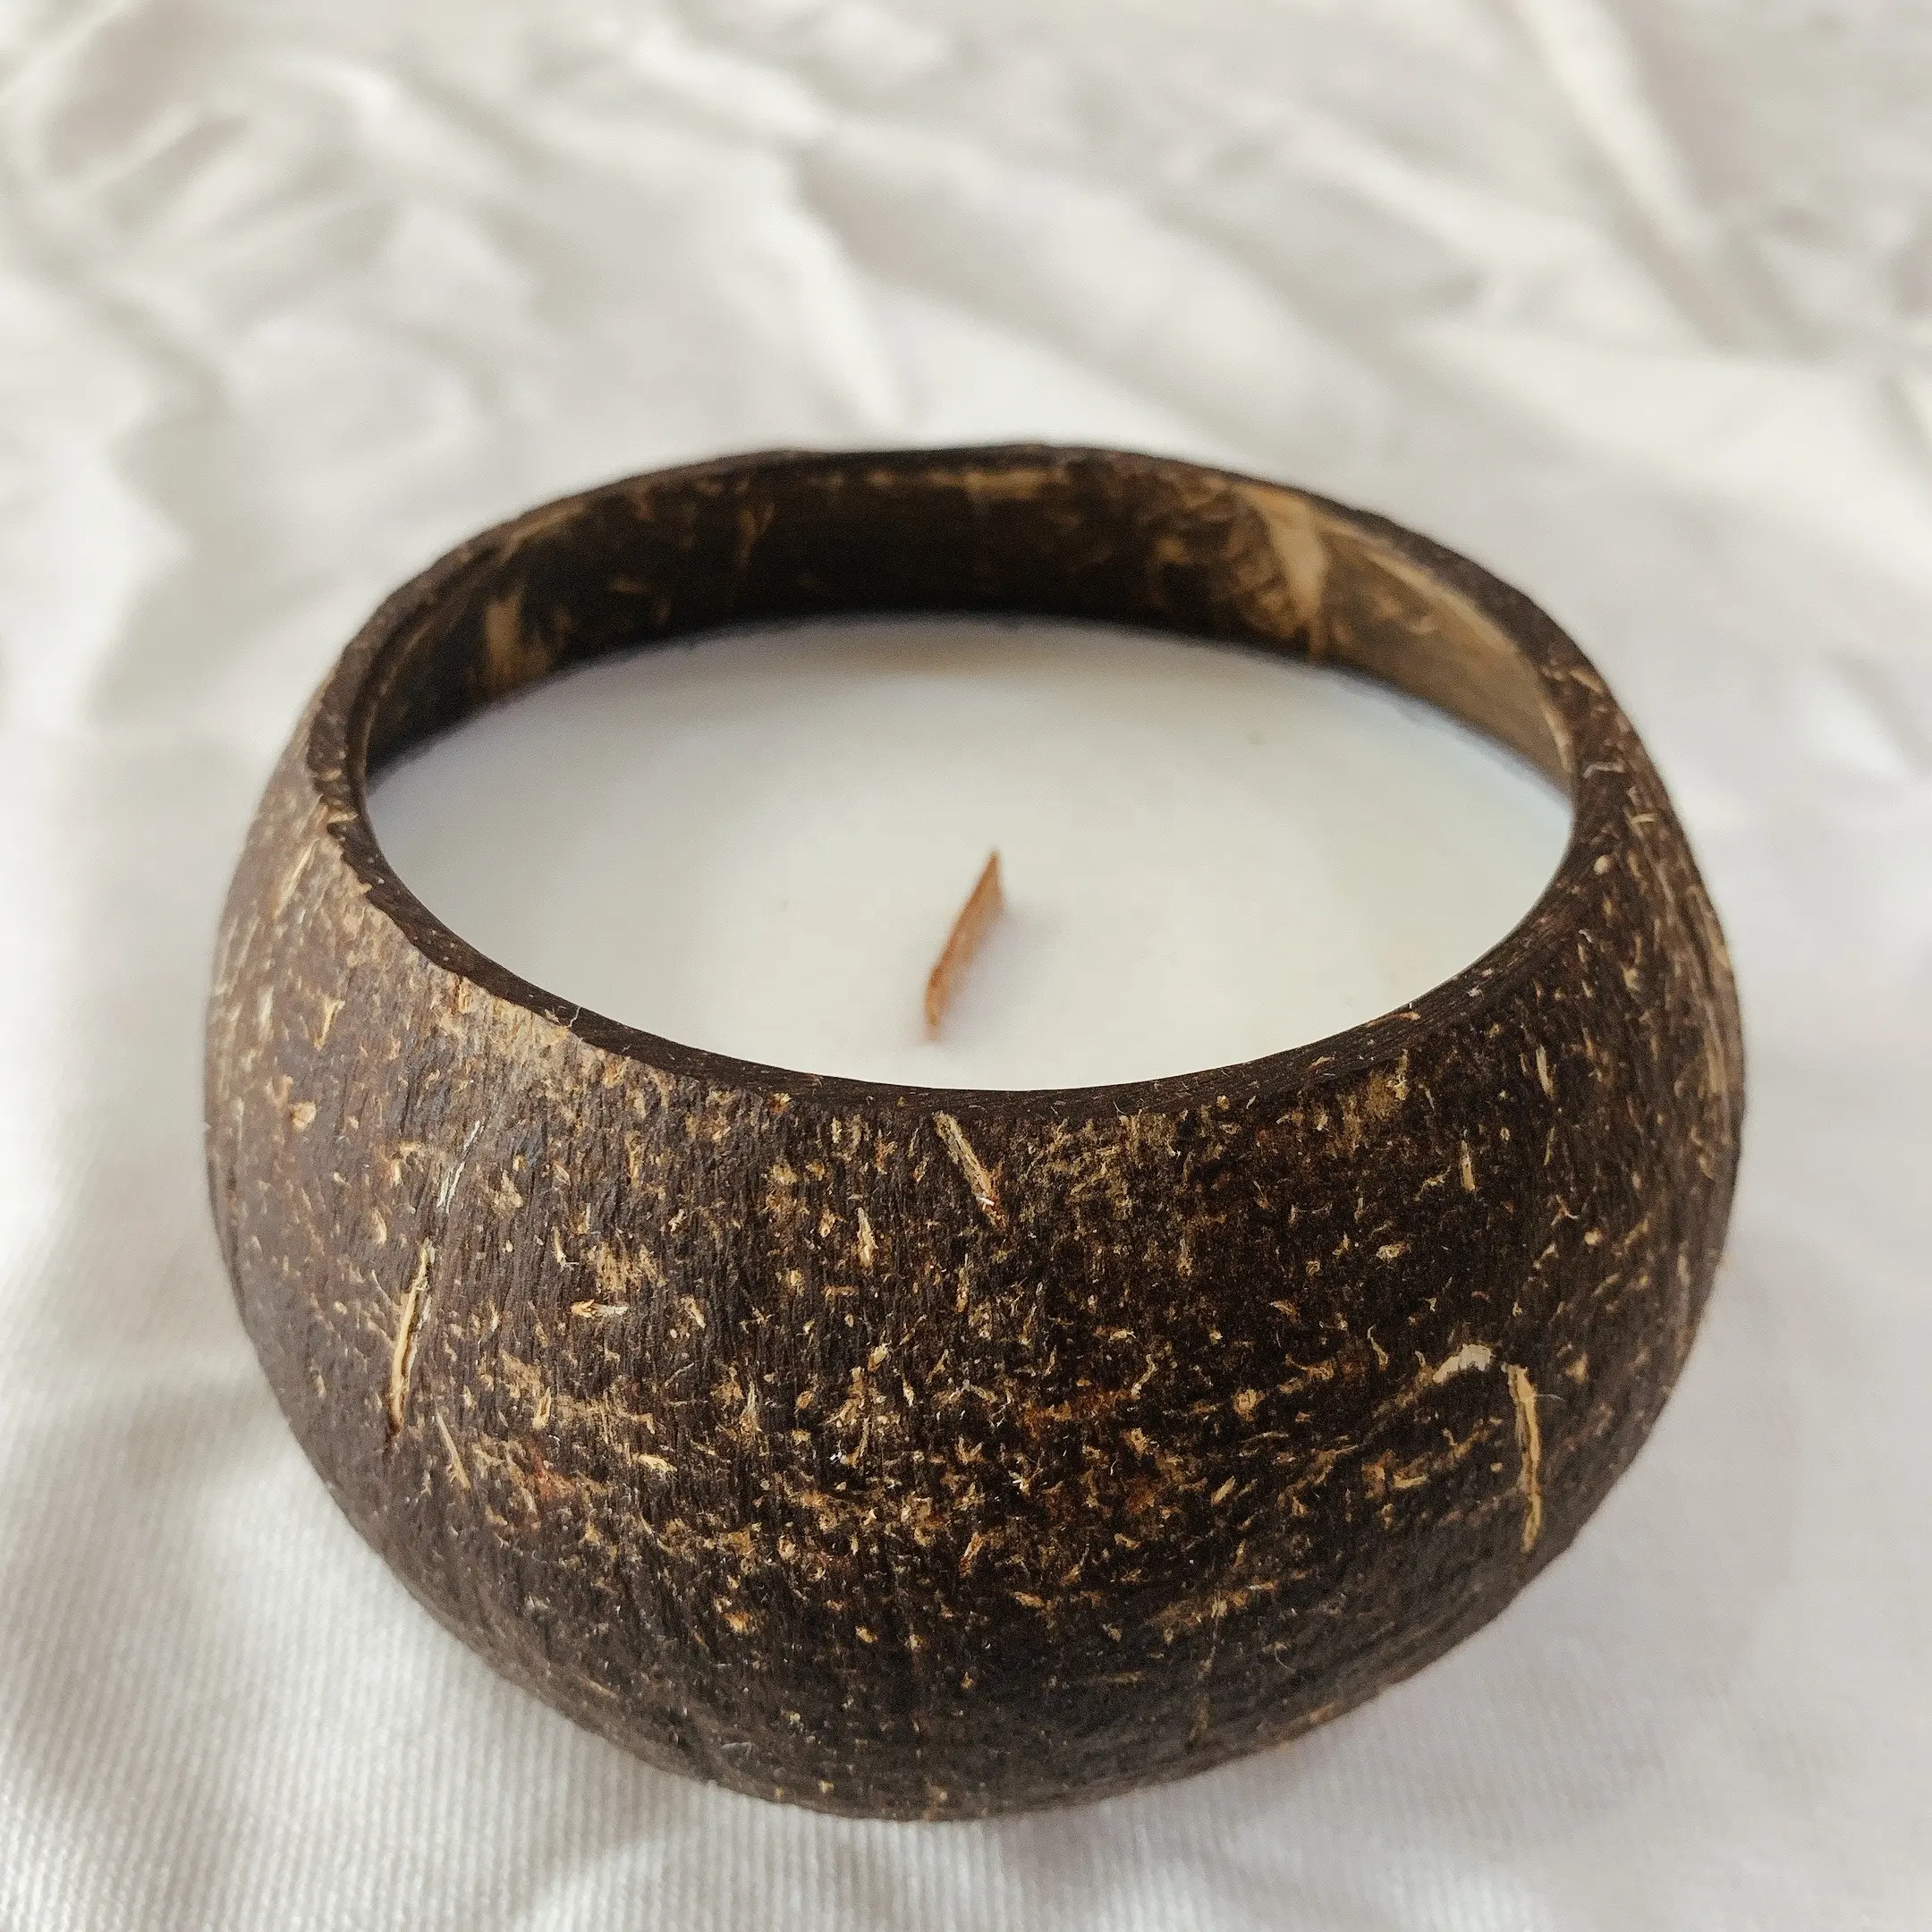 Hot item Eco - Friendly Coconut Candle Bowl Mixture of Coconut and Soy Wax Burns Over 40 Hours